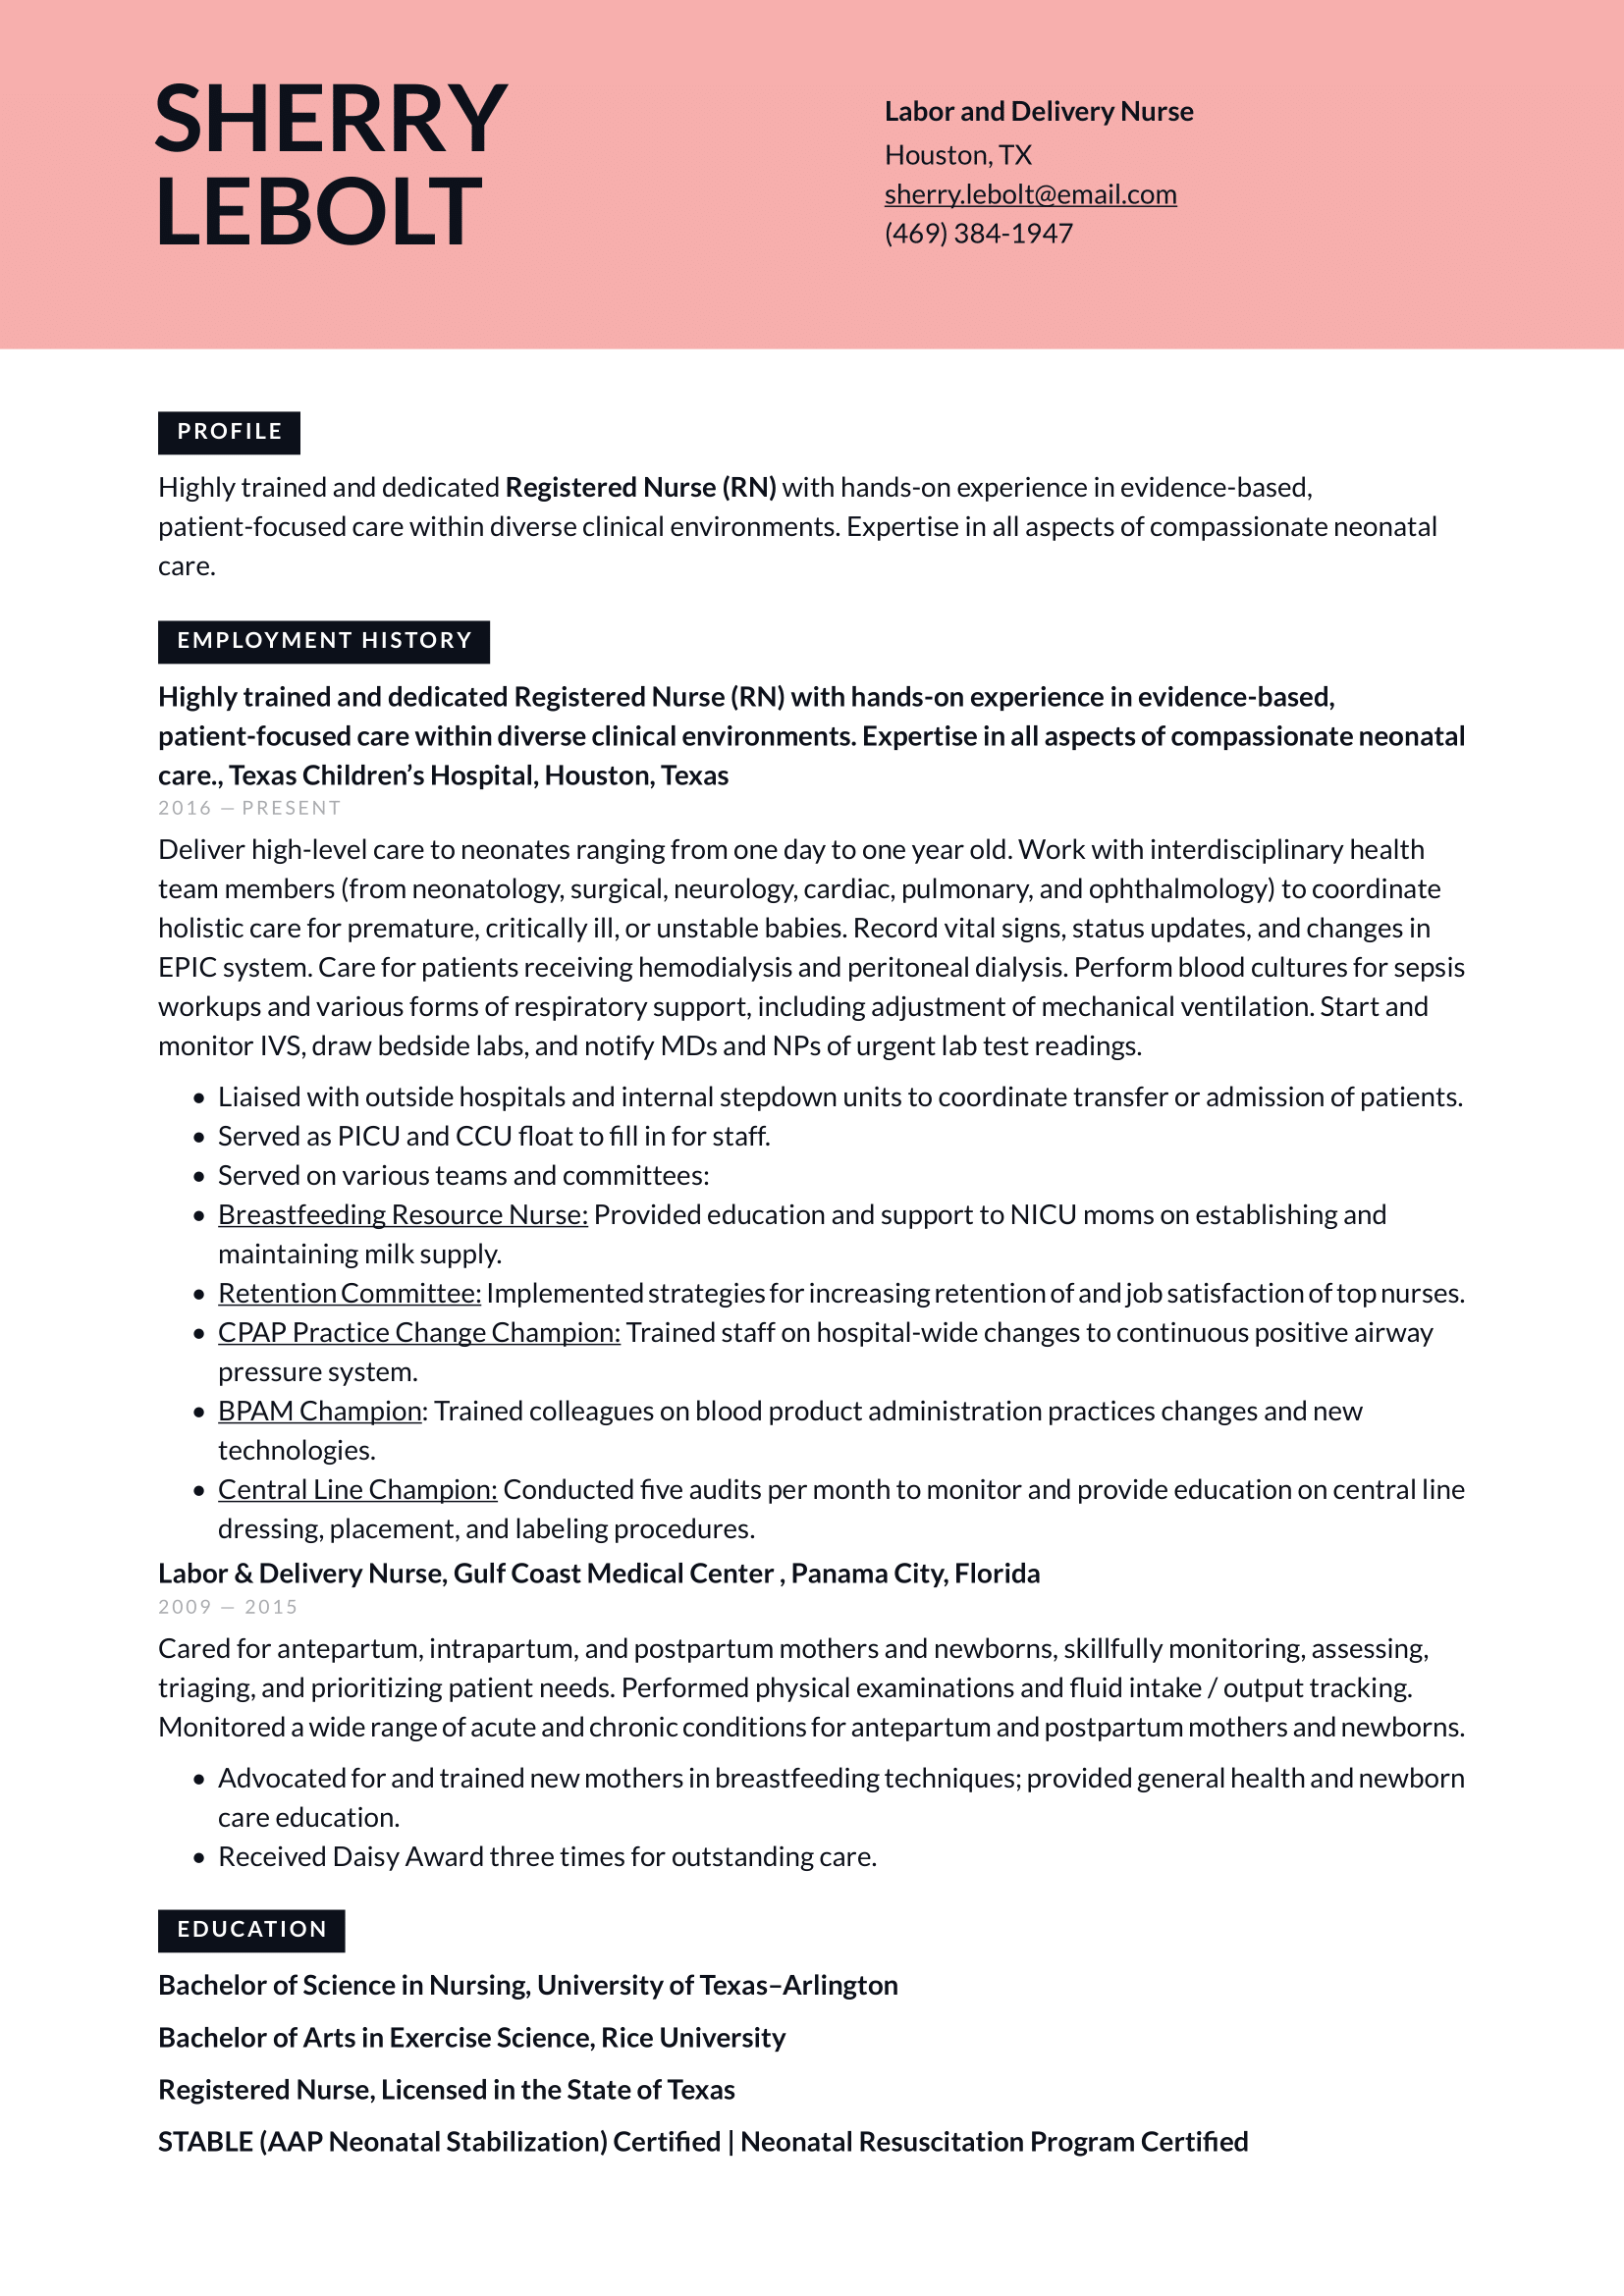 Labor and Delivery Nurse Resume Example and Writing Guide